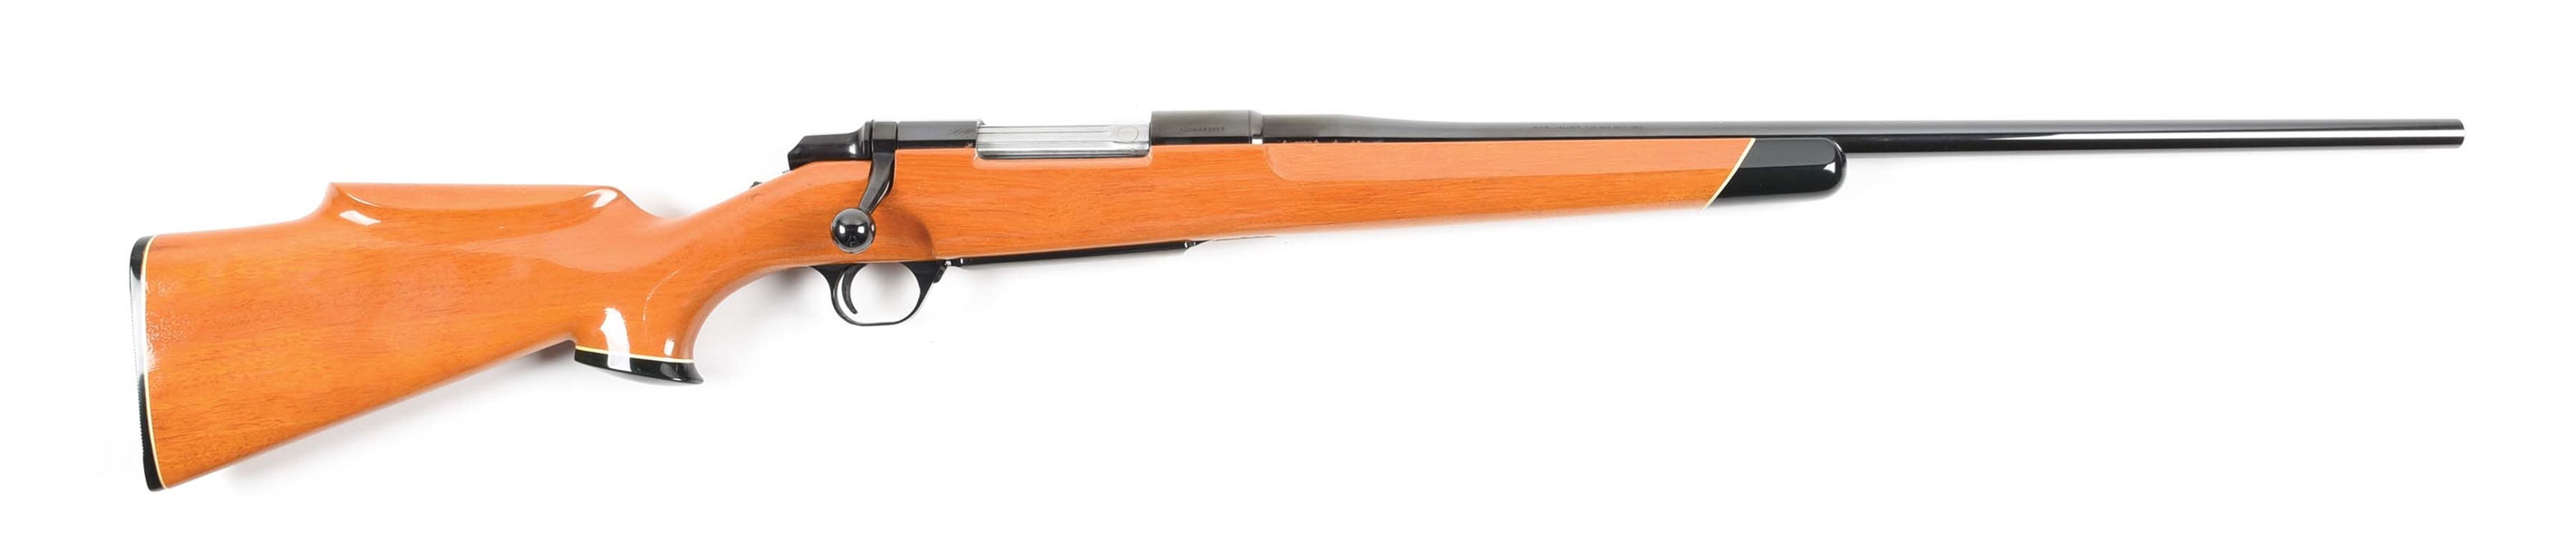 (M) BROWNING BBR BOLT ACTION RIFLE WITH AZOBE STOCK.